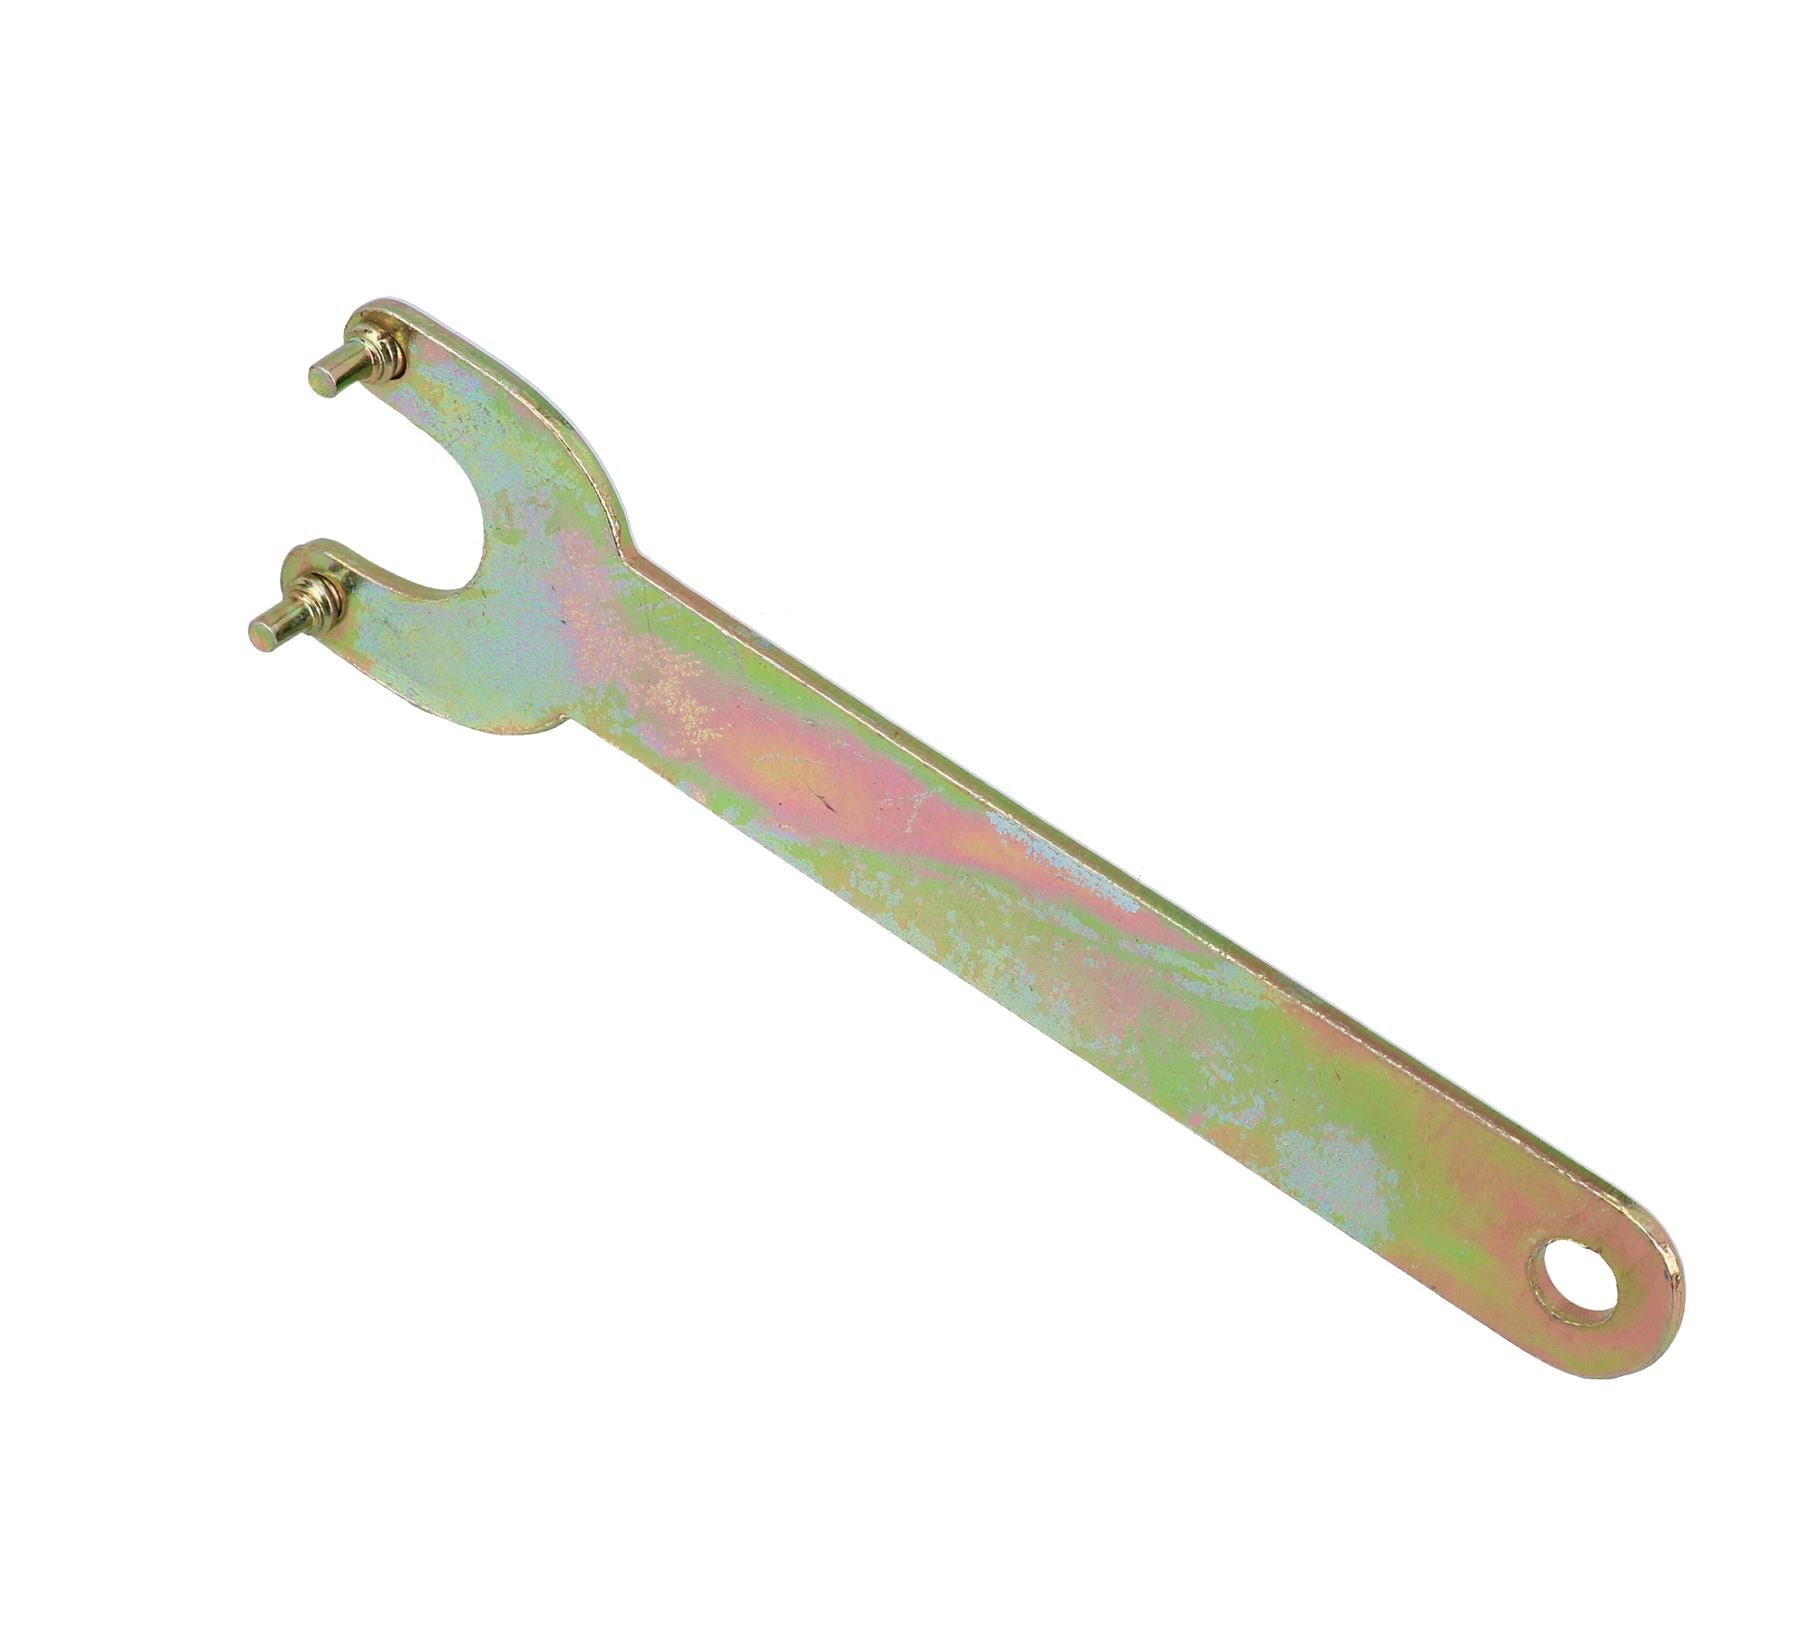 Angle Grinder Spanner Wrench Remover Fitter for 115mm 4-1/2” Grinders